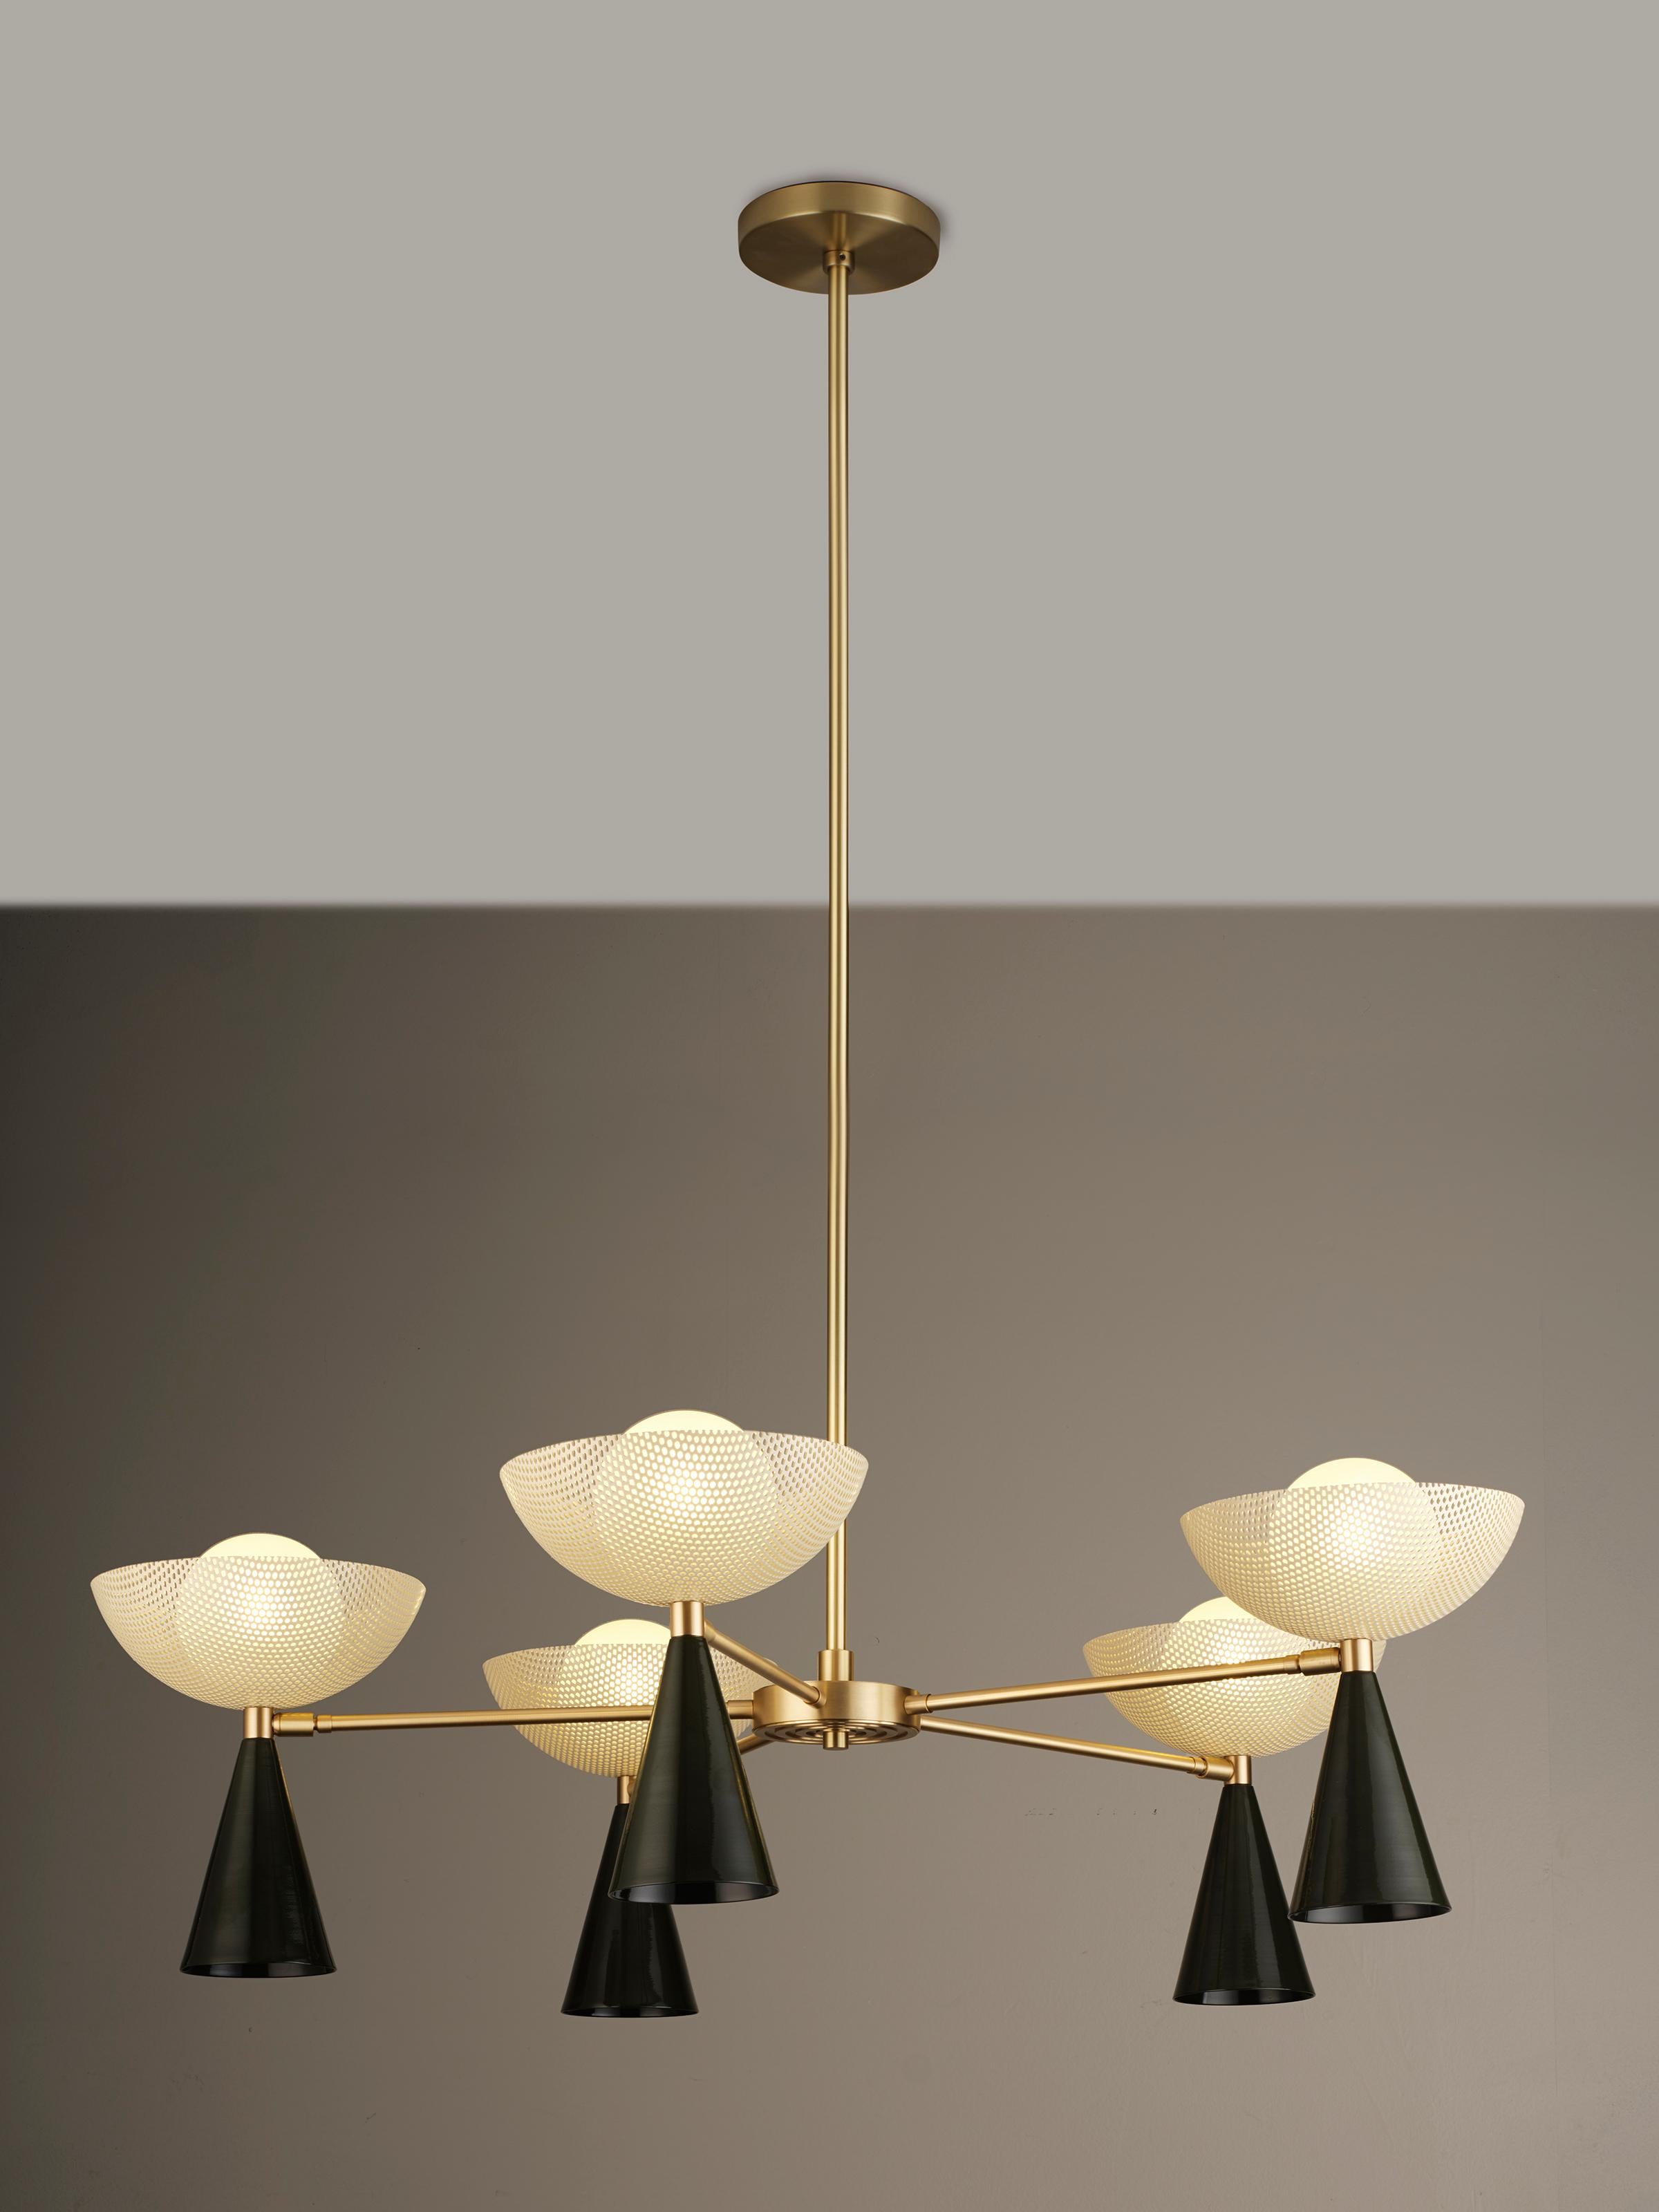 Mid-Century Modern Molto 5-Arm Ceiling Fixture in Brushed Brass + Enameled Mesh, Blueprint Lighting